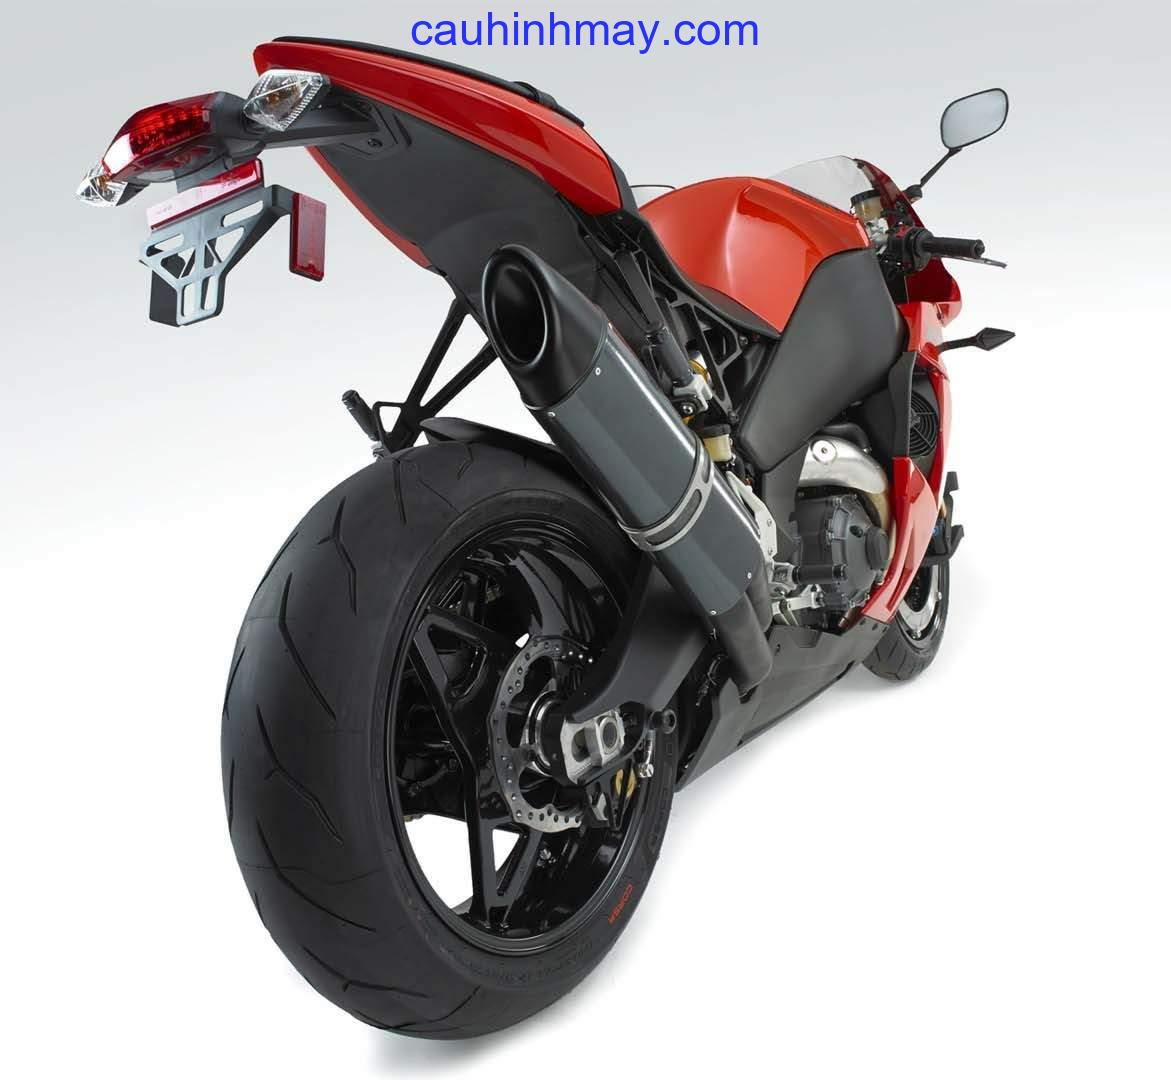 BUELL RACING 1190RX - cauhinhmay.com